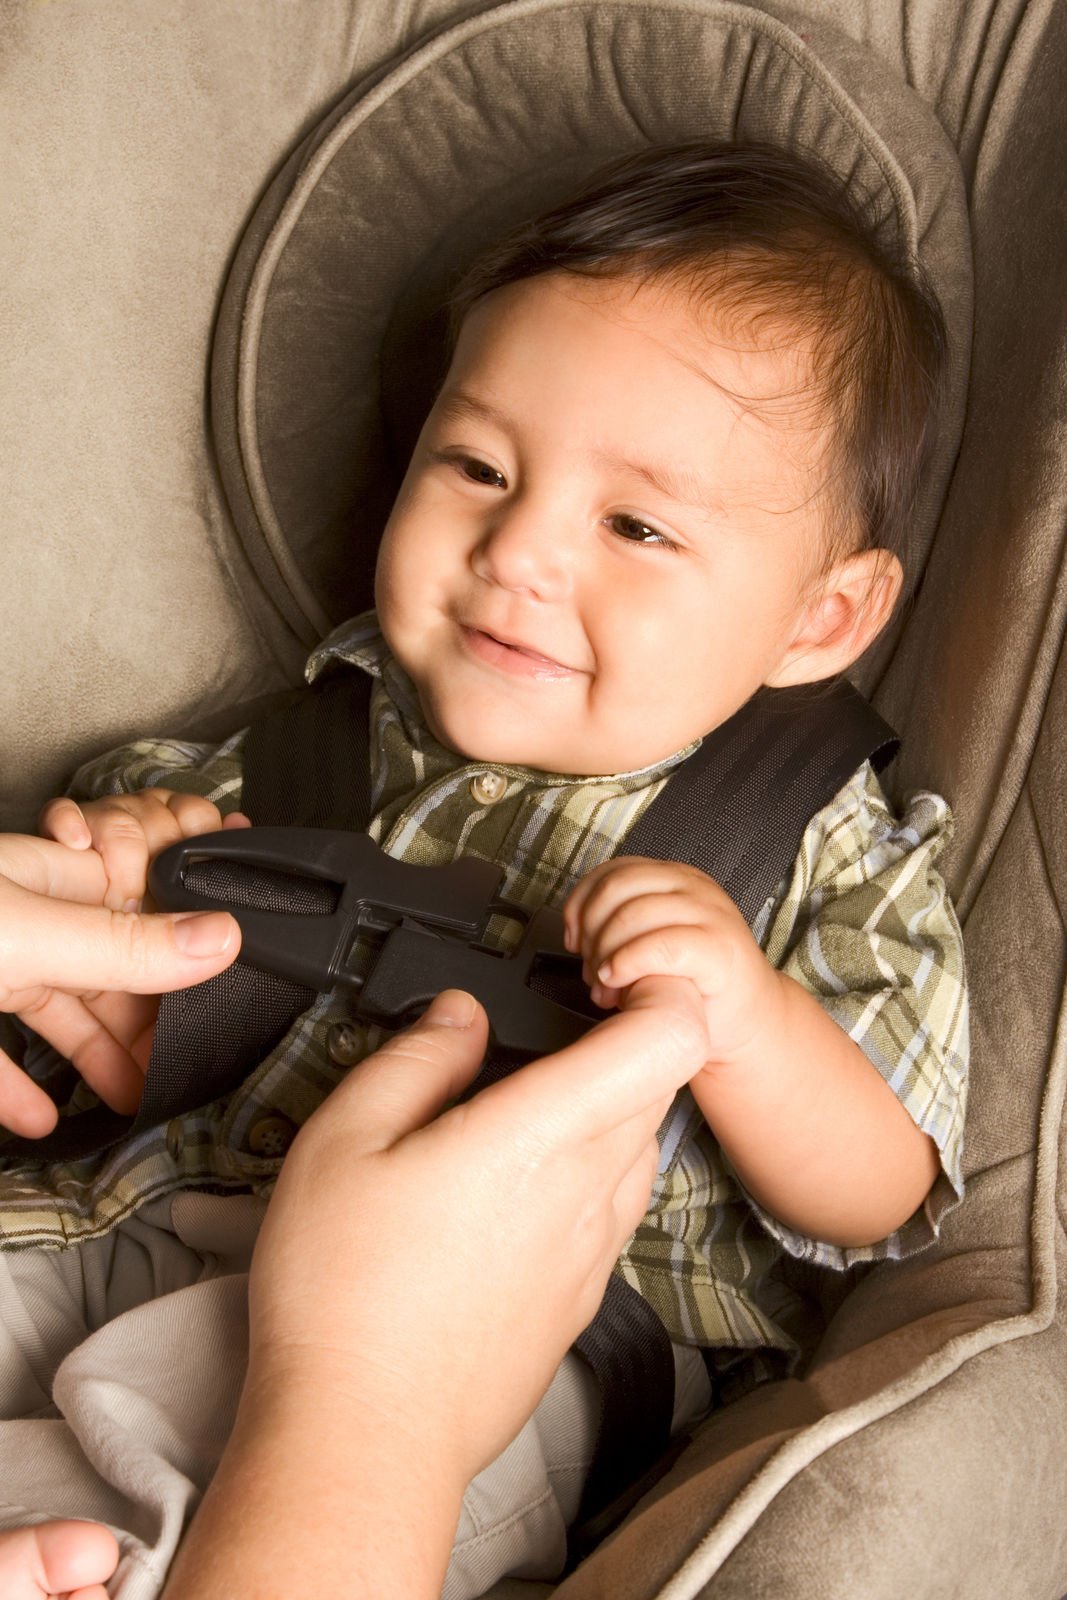 What are the Child Safety Seat Laws in Idaho?